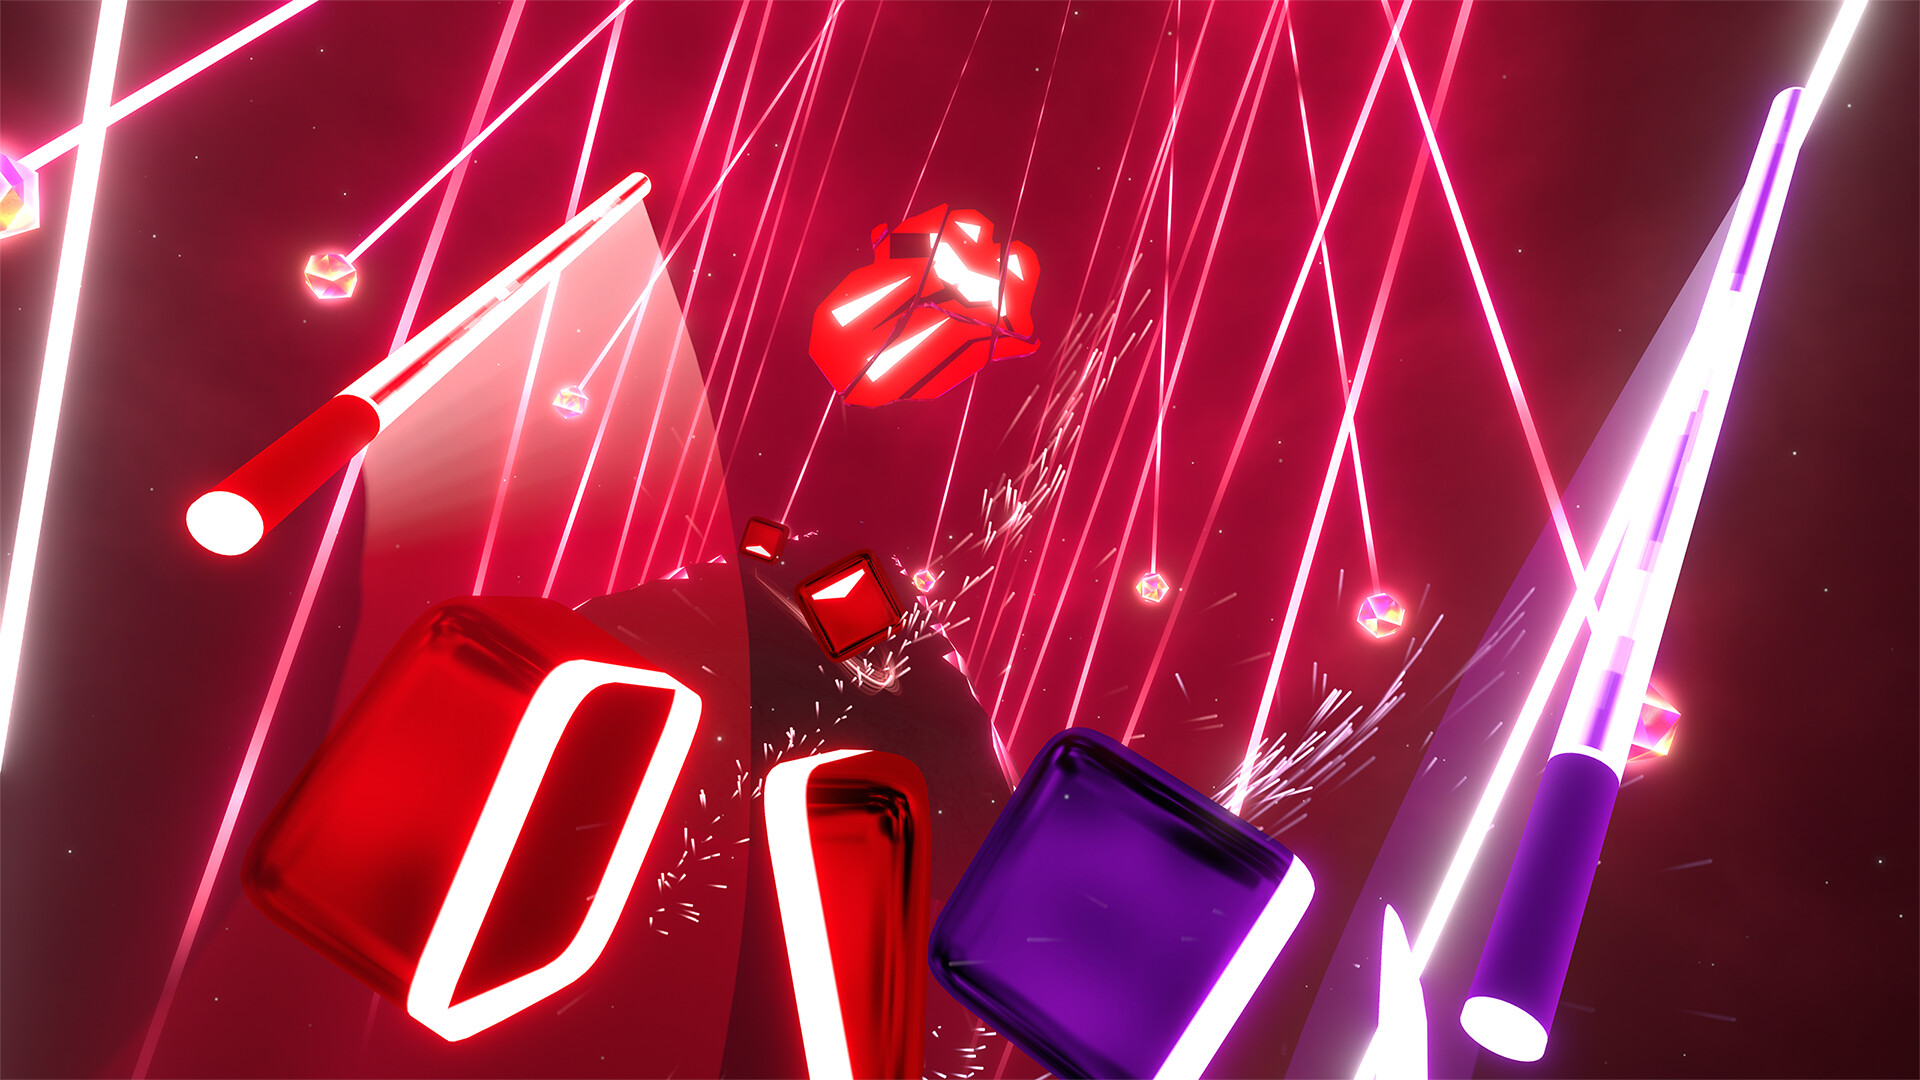 Beat Saber - The Rolling Stones - "Paint It Black" Featured Screenshot #1